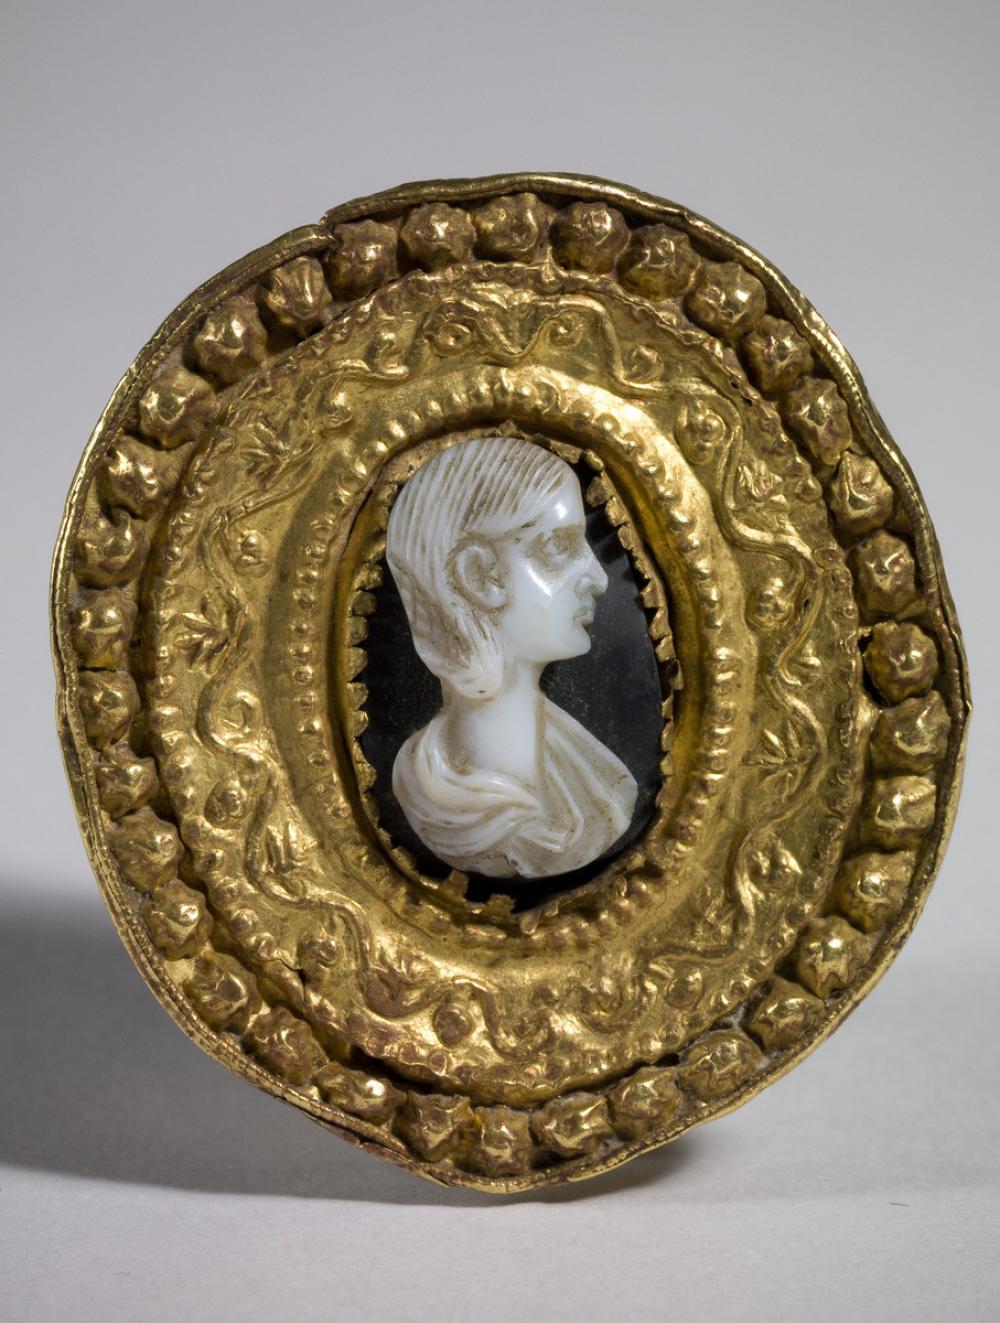 Roman, Brooch with cameo portrait of woman